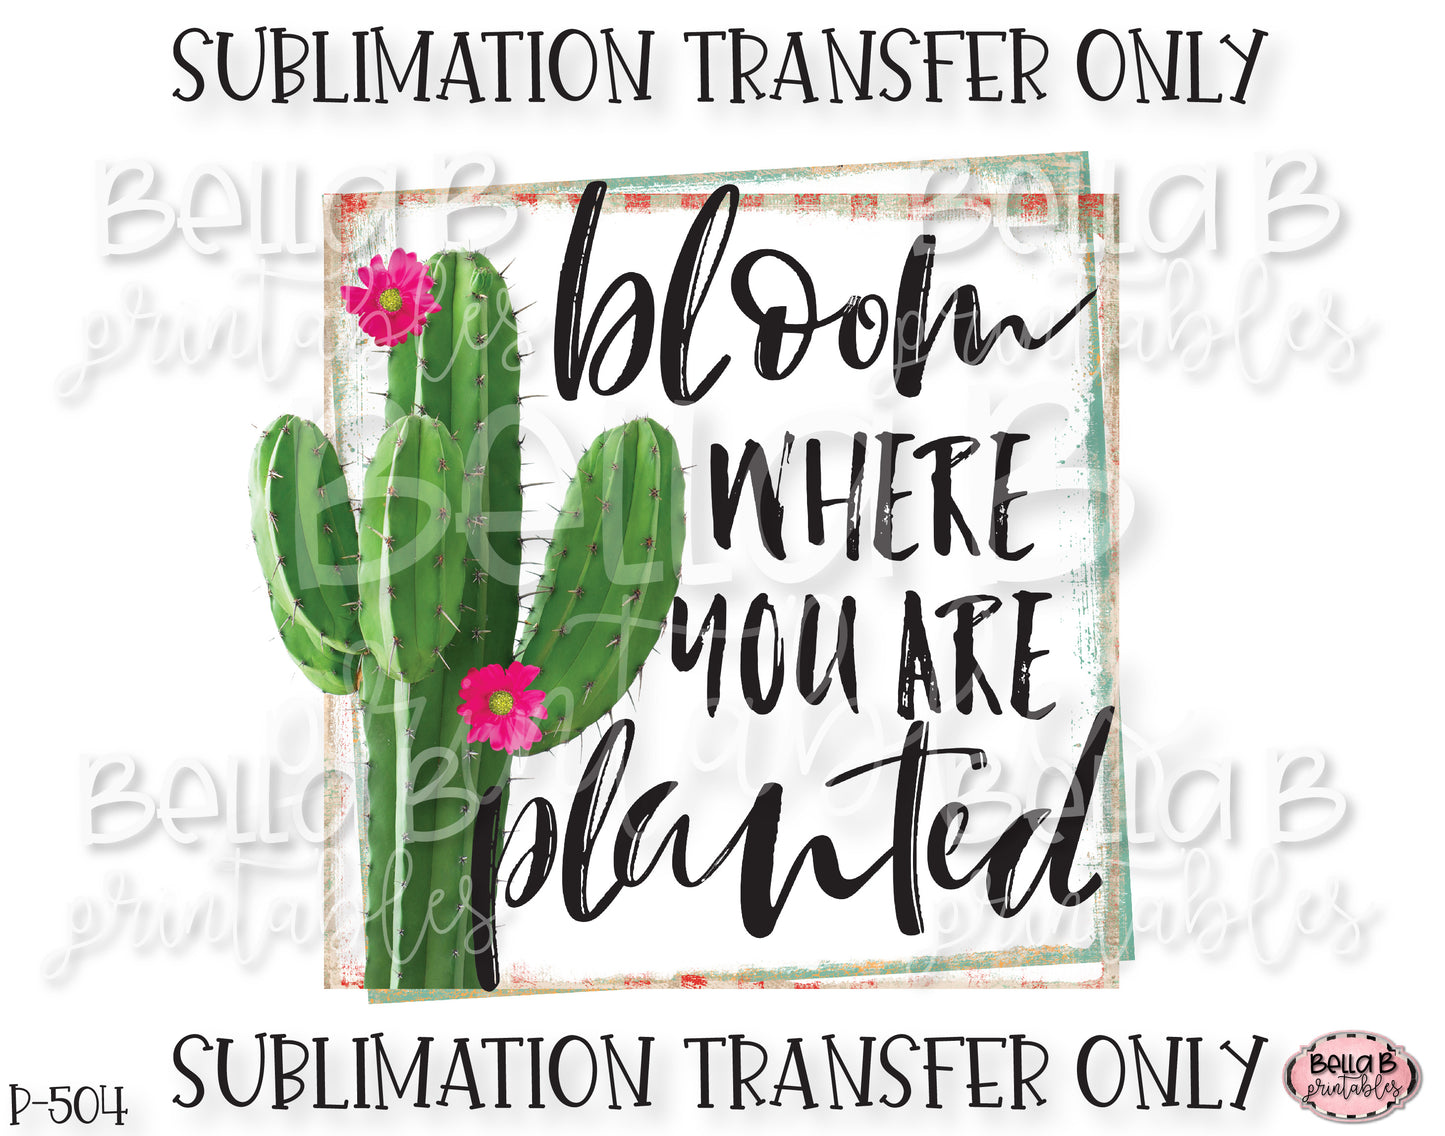 Cactus Sublimation Transfer, Bloom Where You Are Planted, Ready To Press, Heat Press Transfer, Sublimation Print